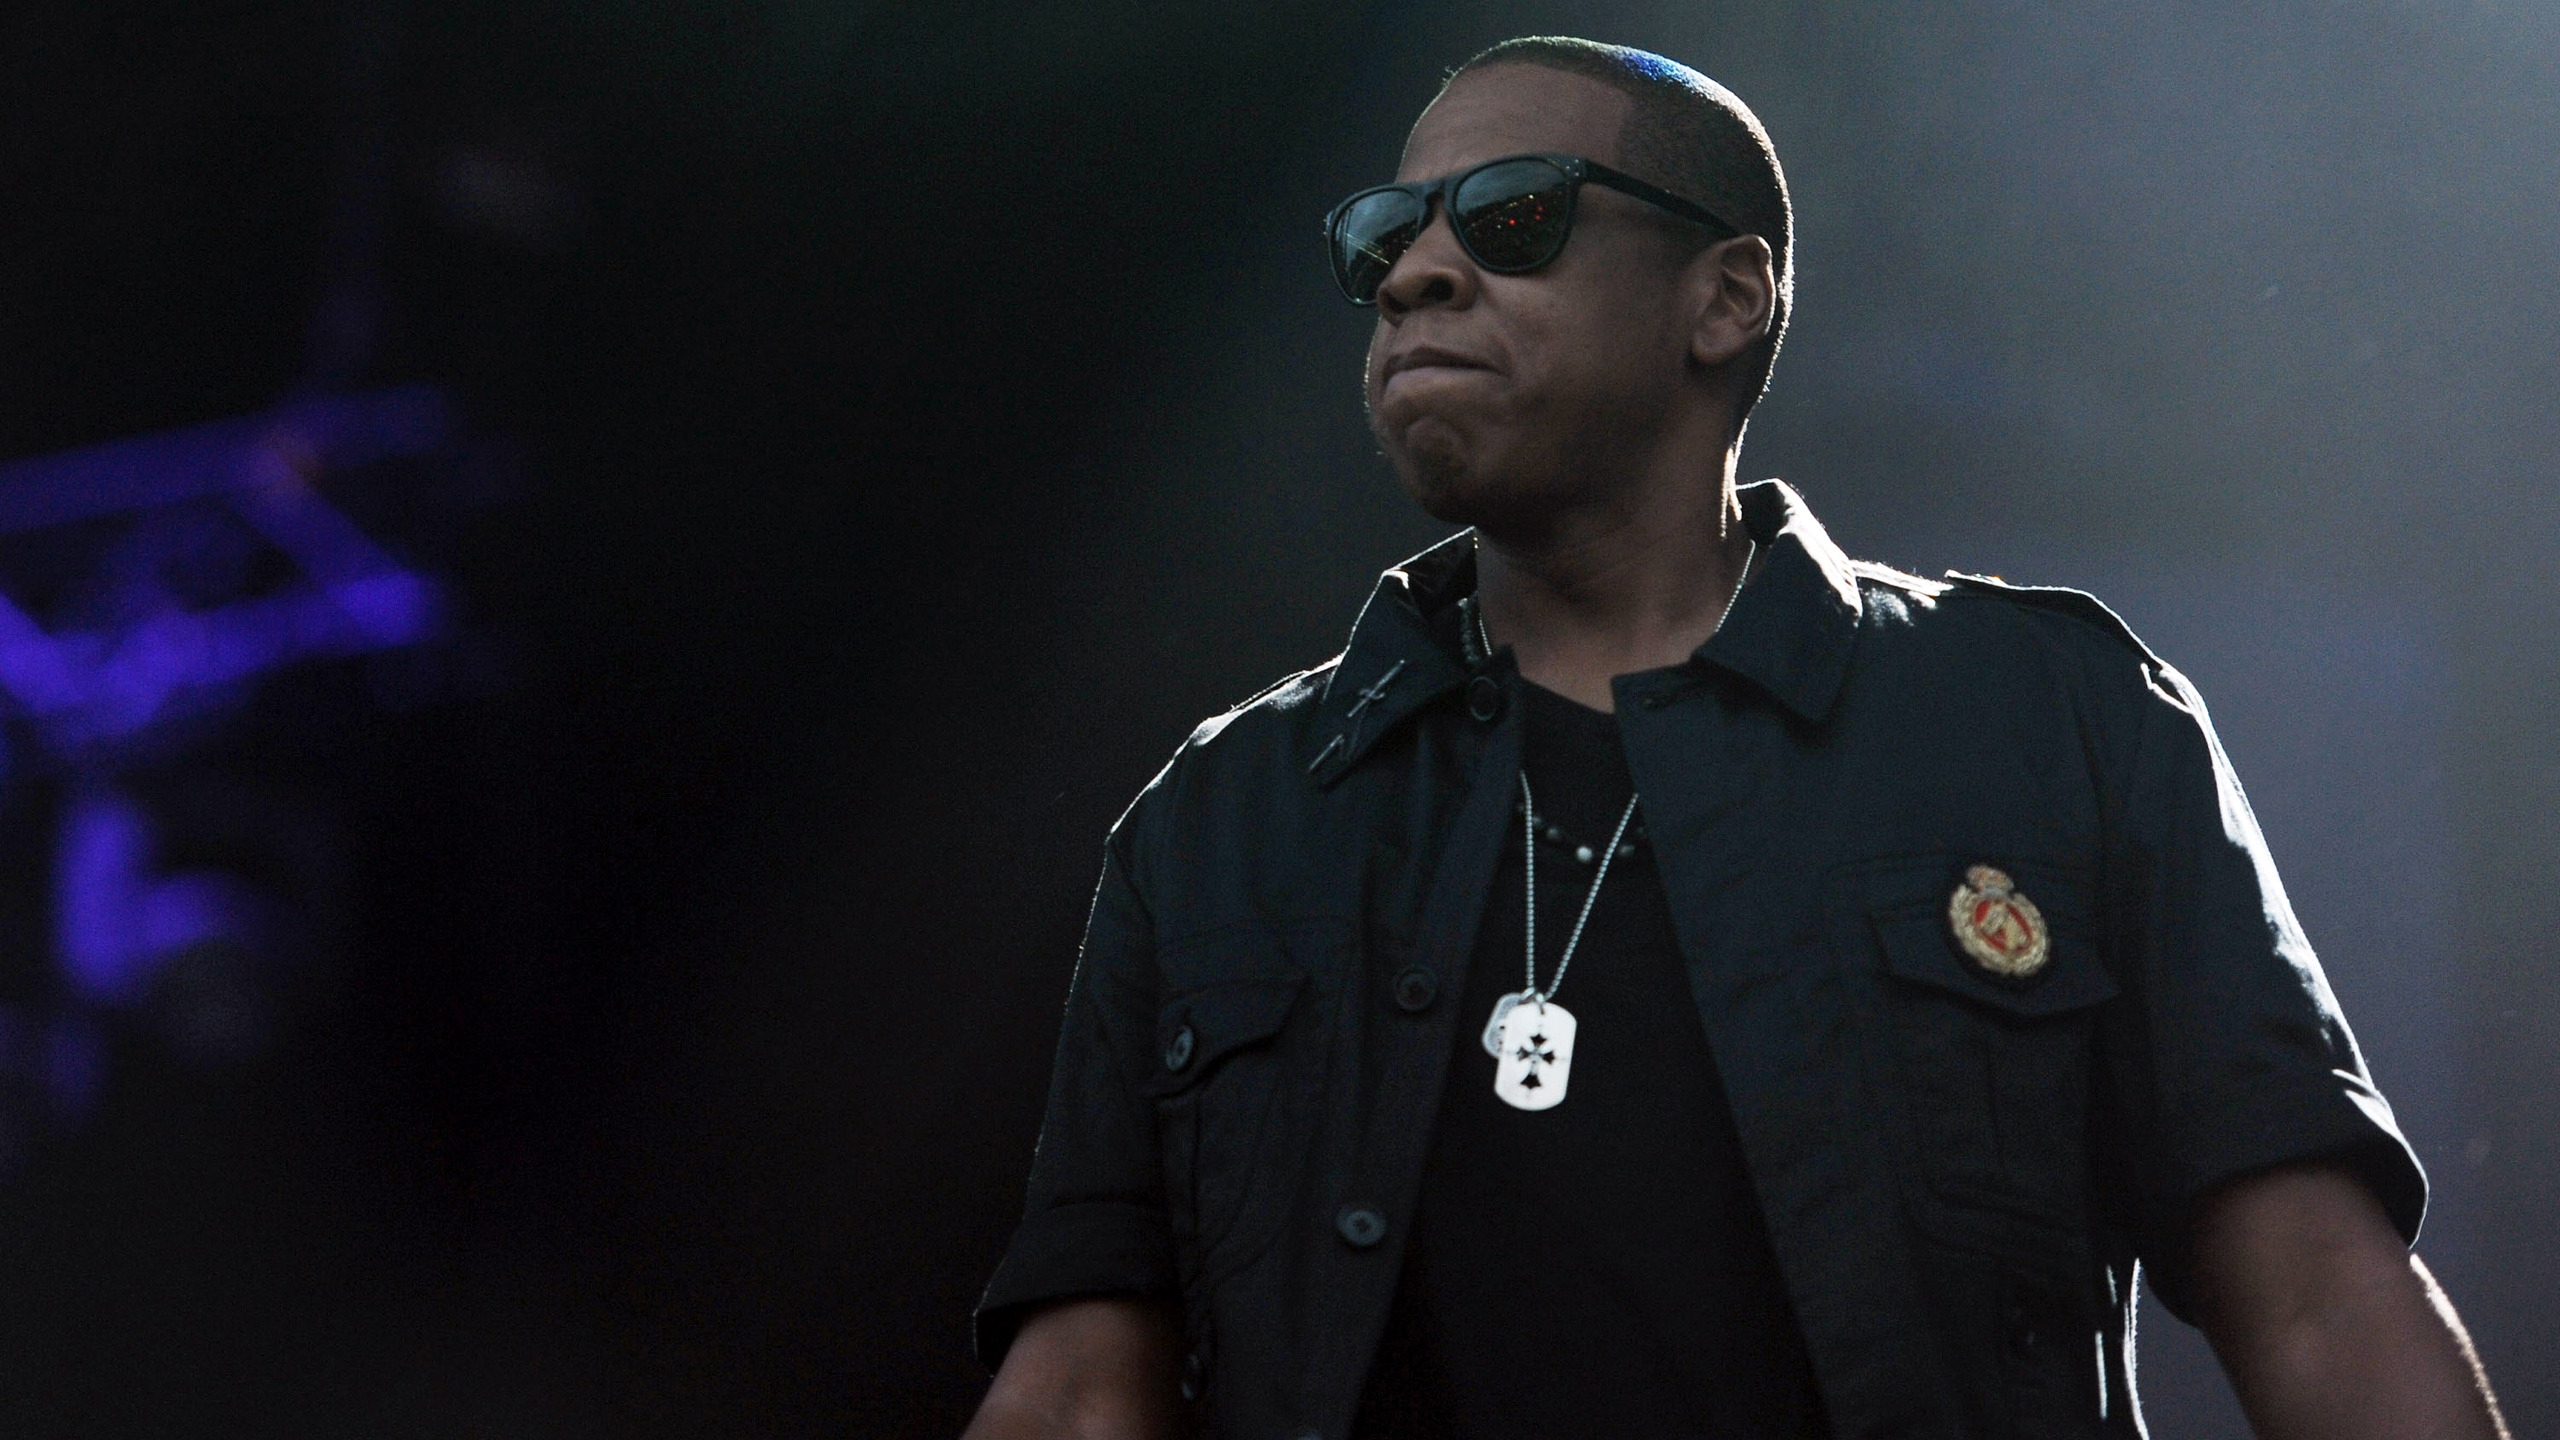 Cool Jay Z for 2560x1440 HDTV resolution